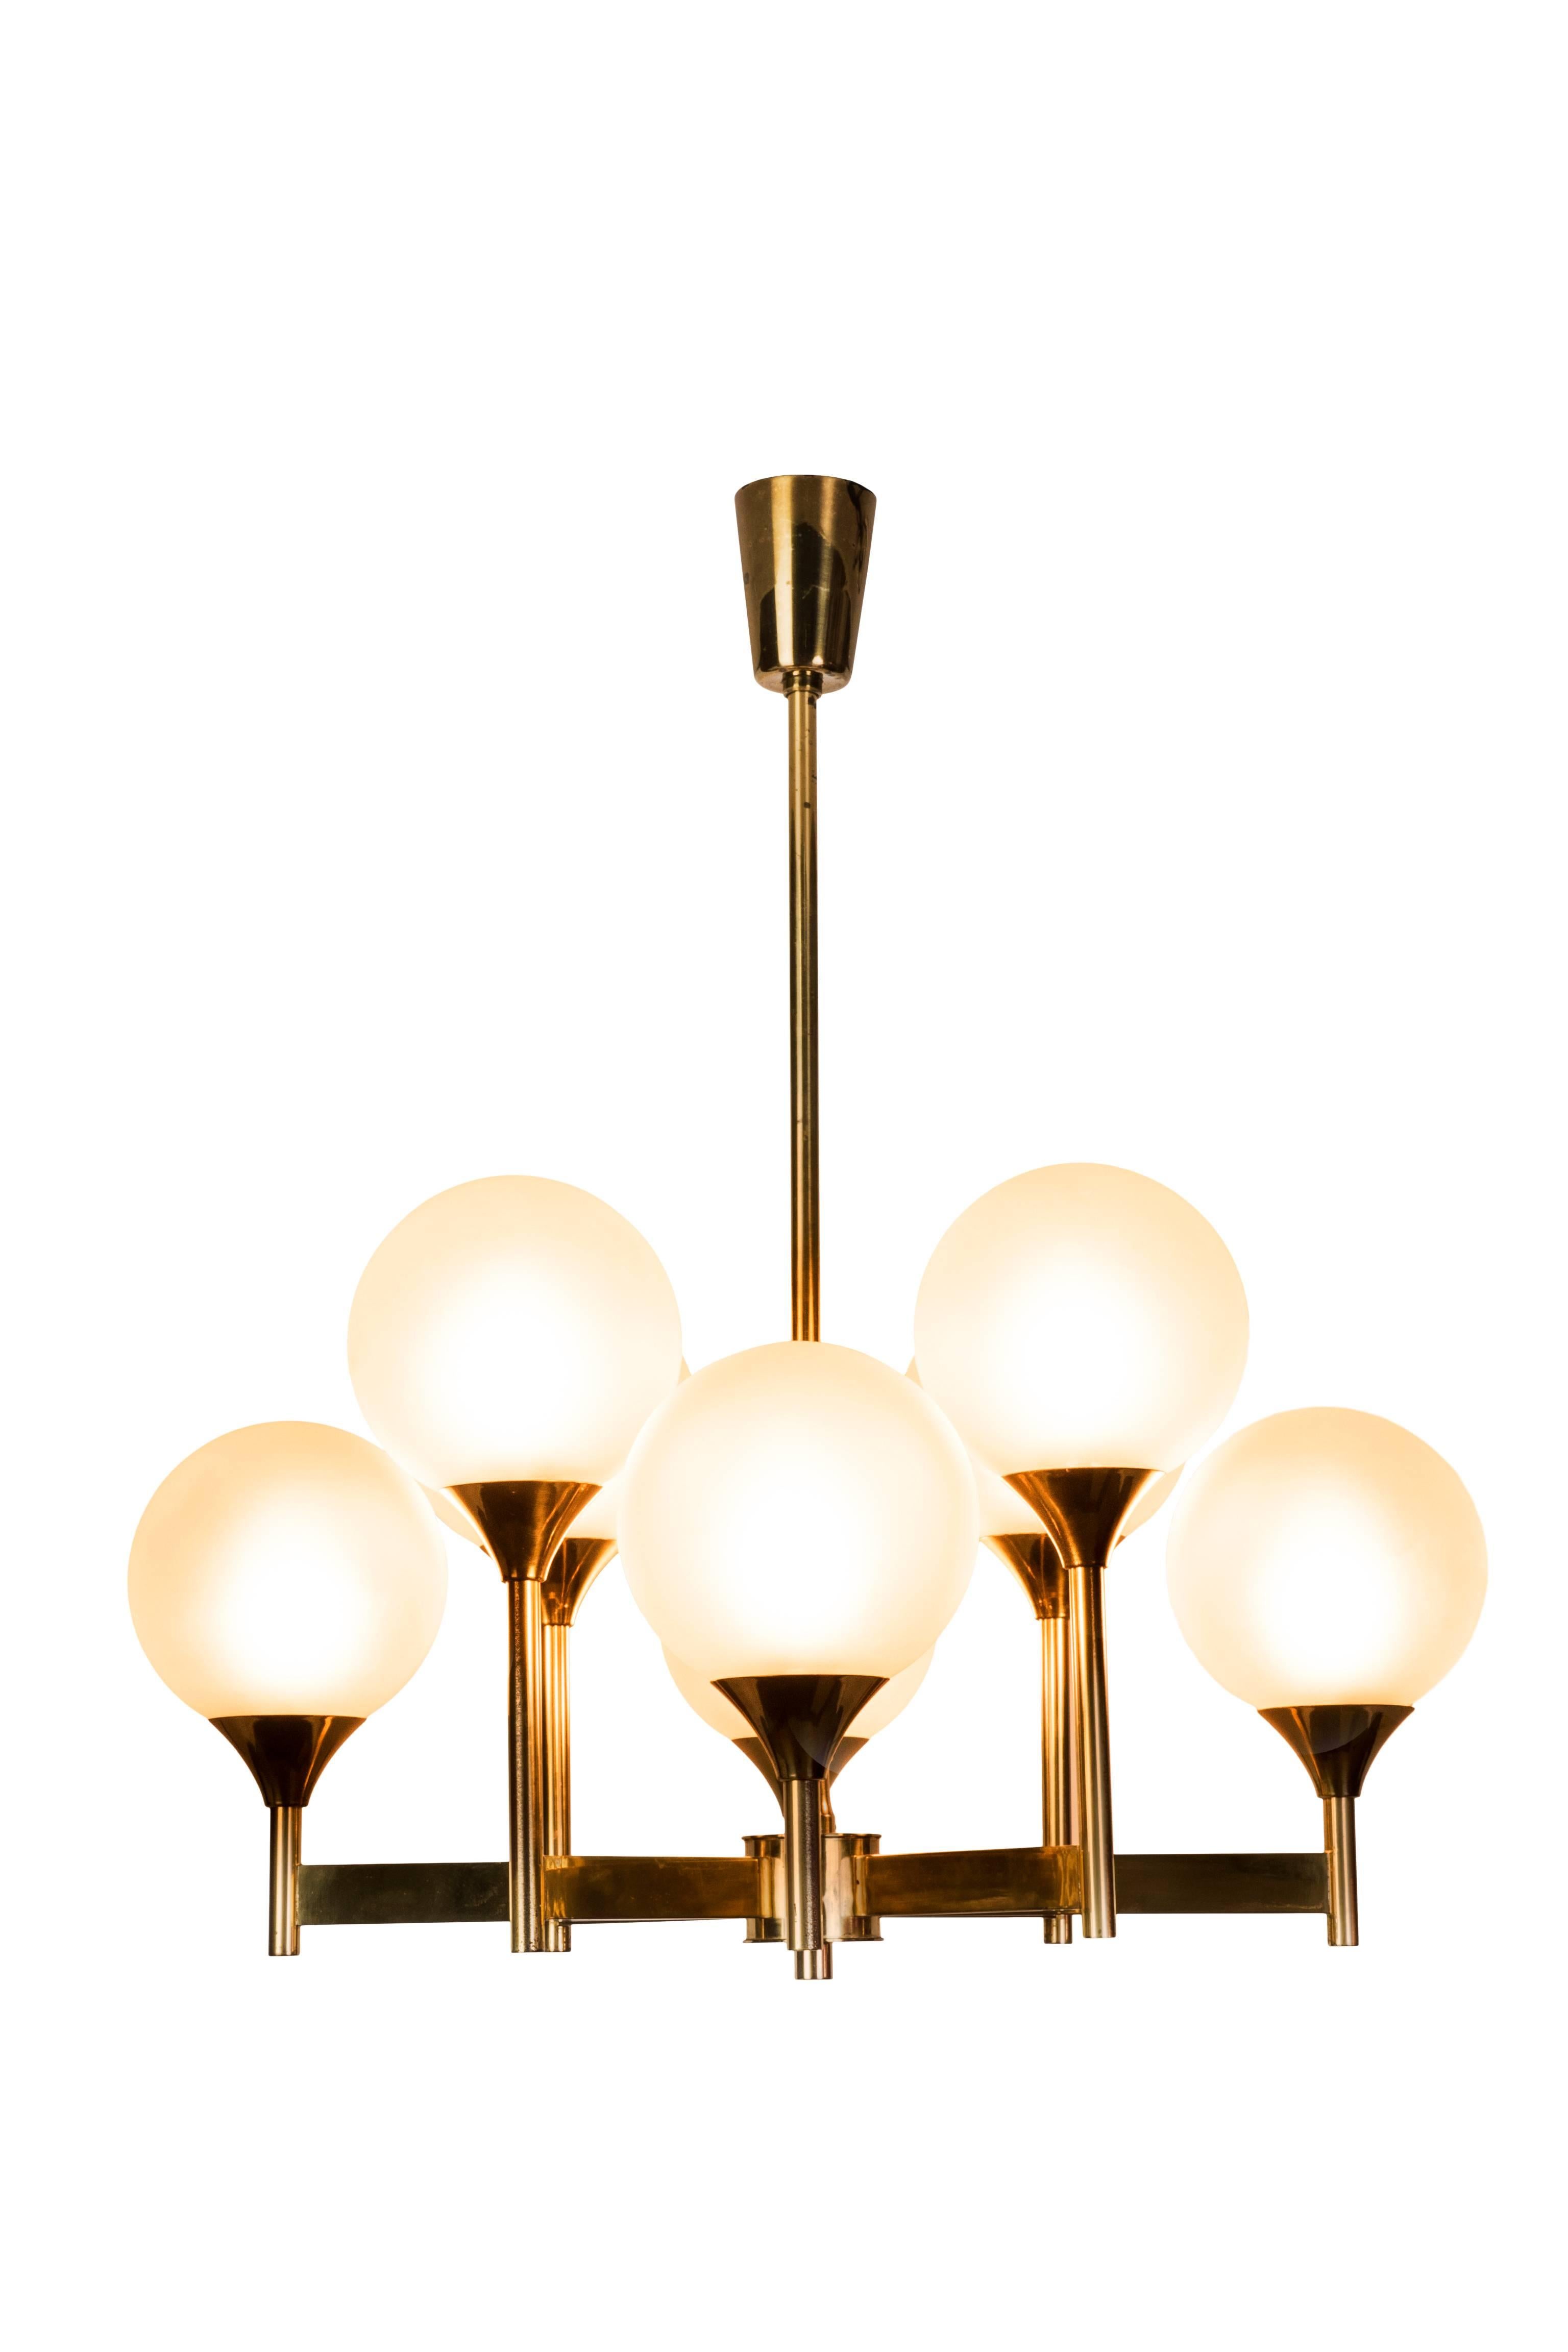 This exceptional Sputnik chandelier features 8 spherical frosted glass globes on a brass frame.

Made in Germany, circa 1970

22